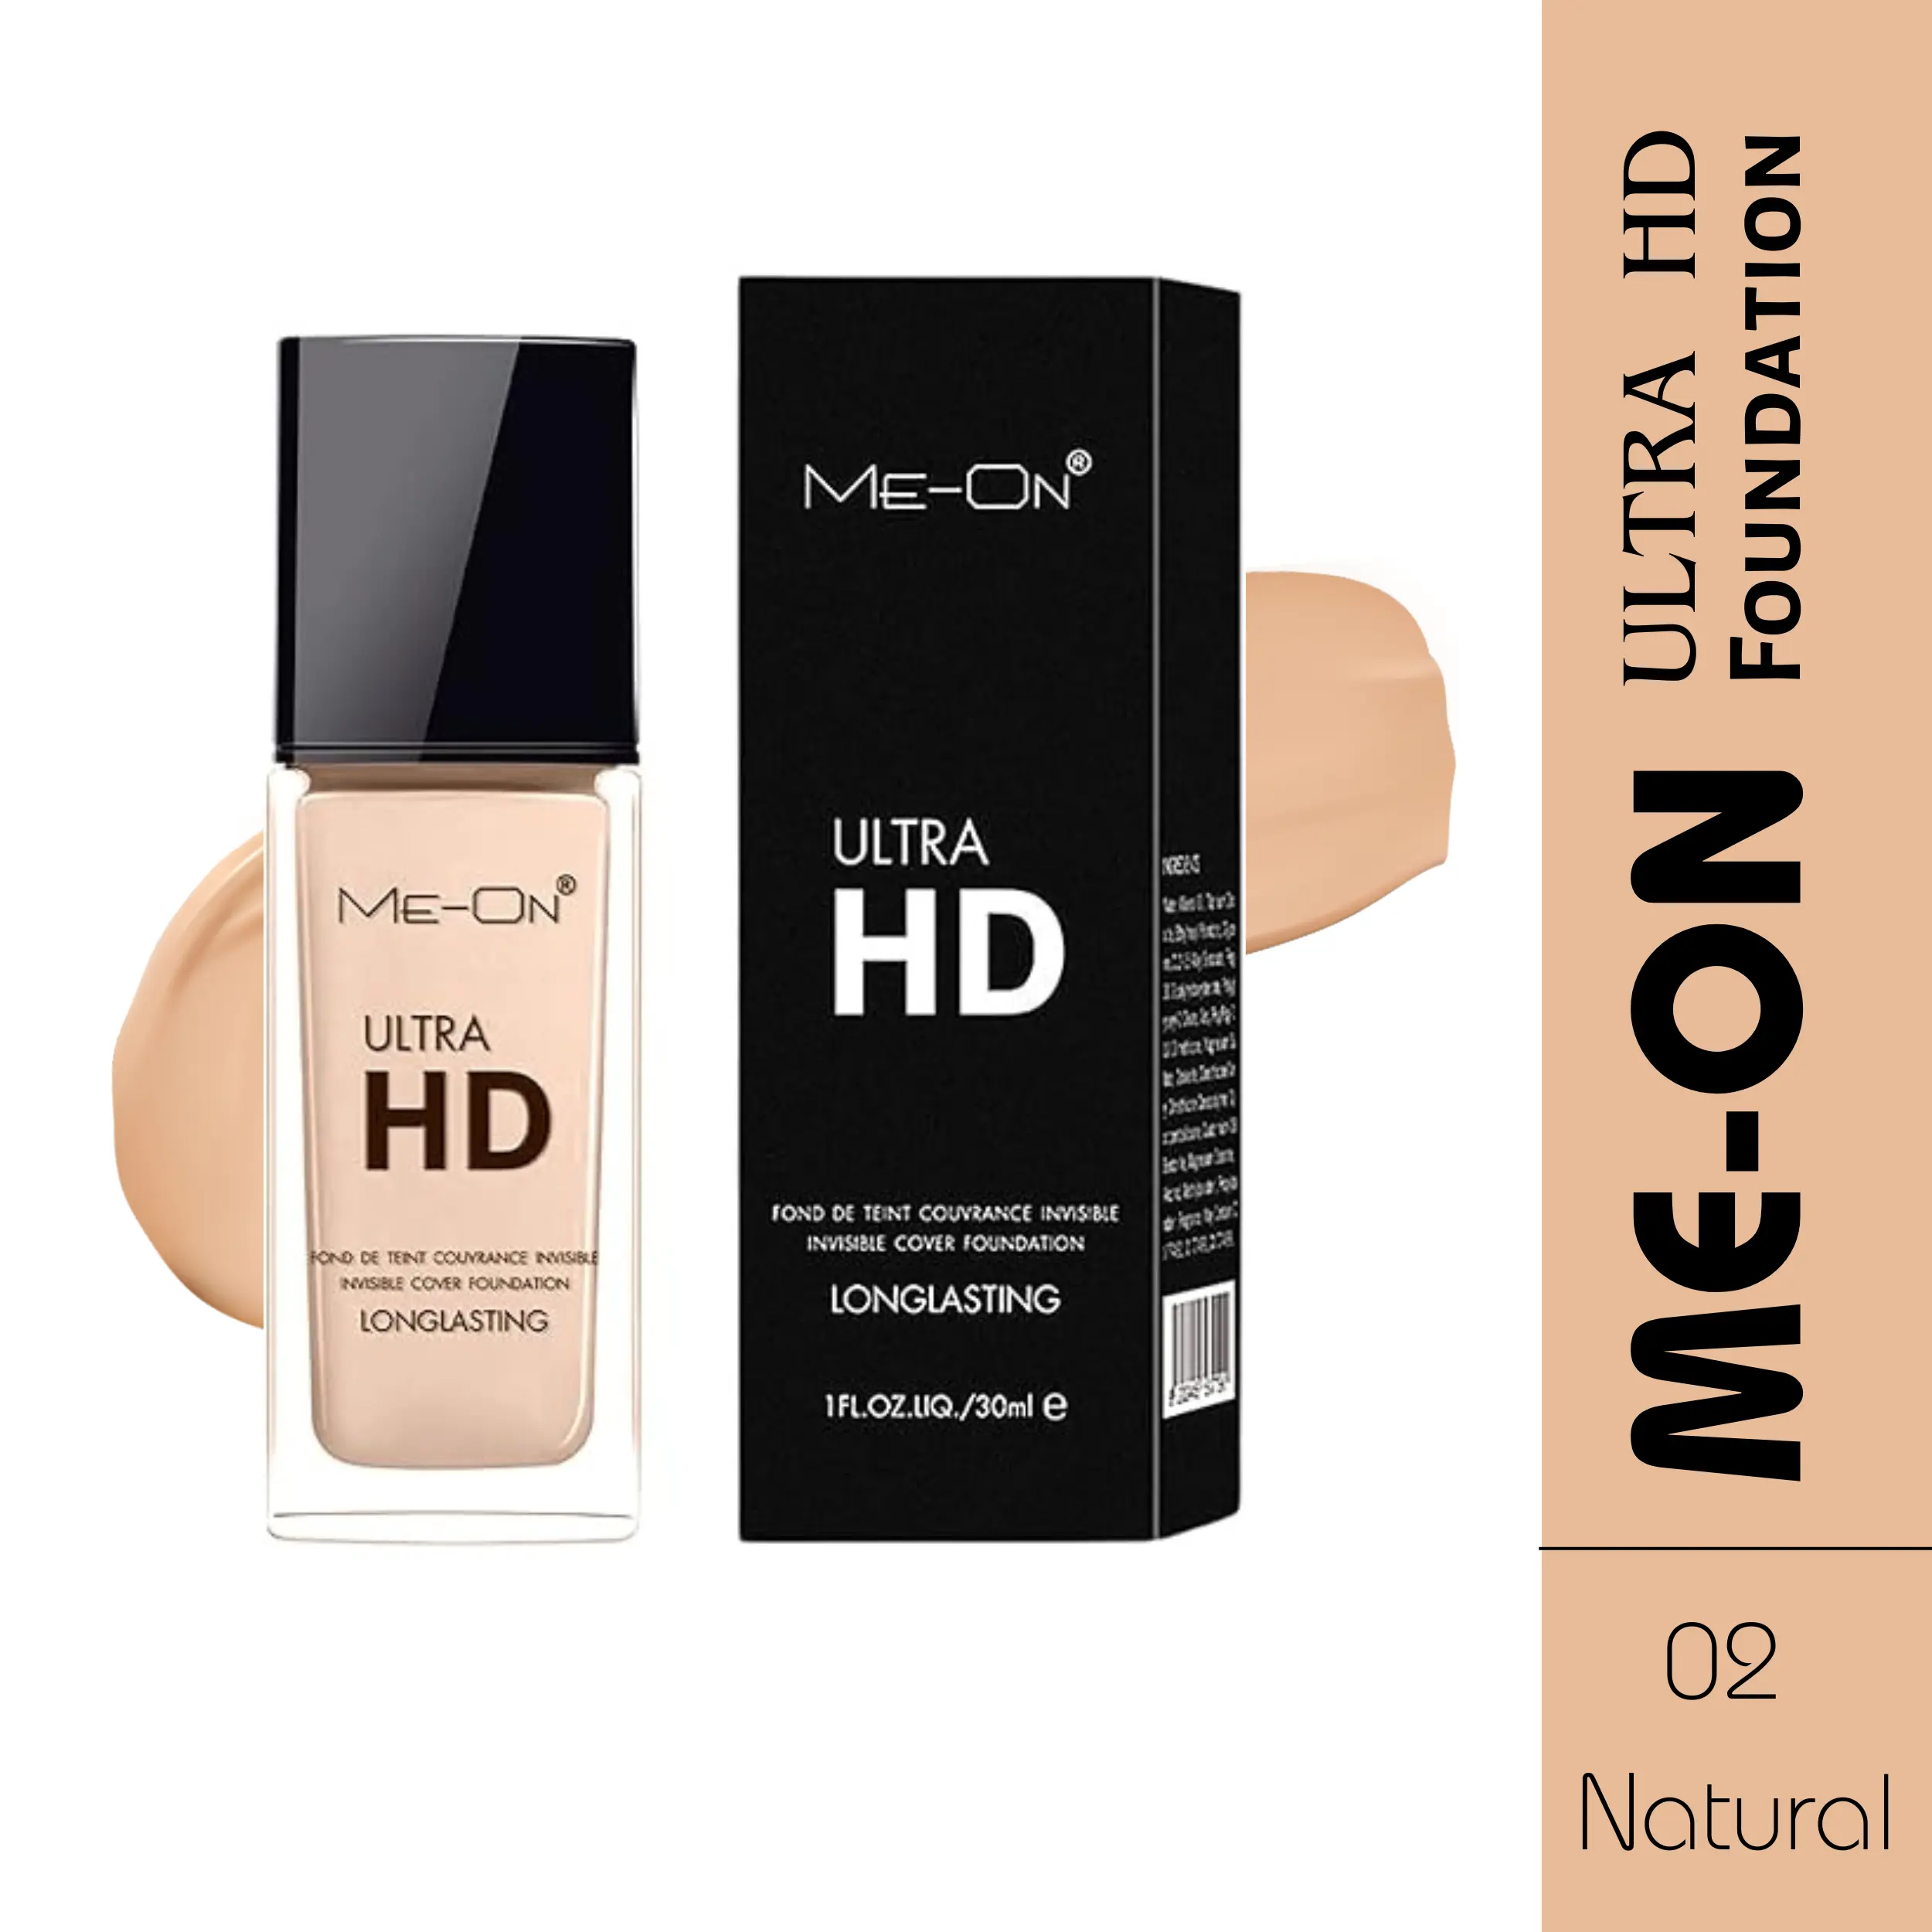 ME-ON Ultra HD Foundation 02 Natural